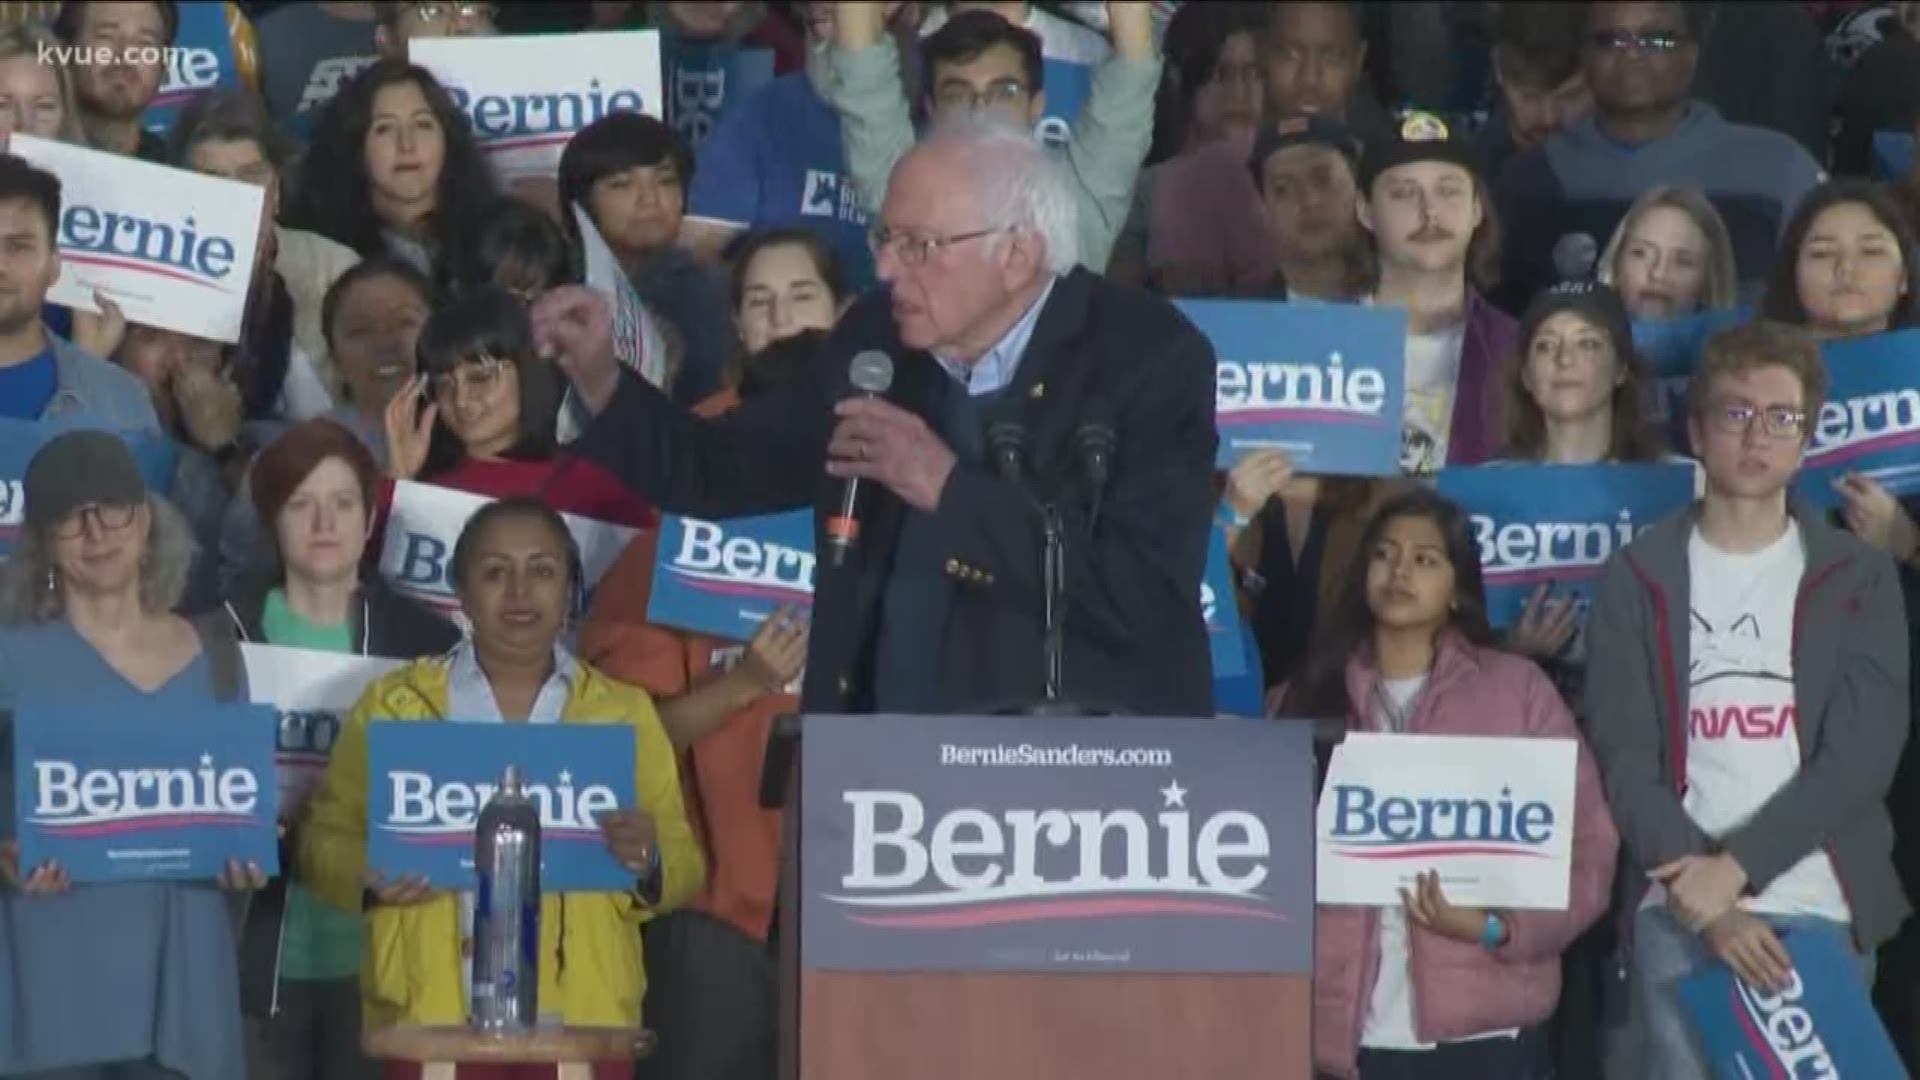 Sen. Sanders spoke about political issues such as healthcare, gun safety legislation and abortion rights.